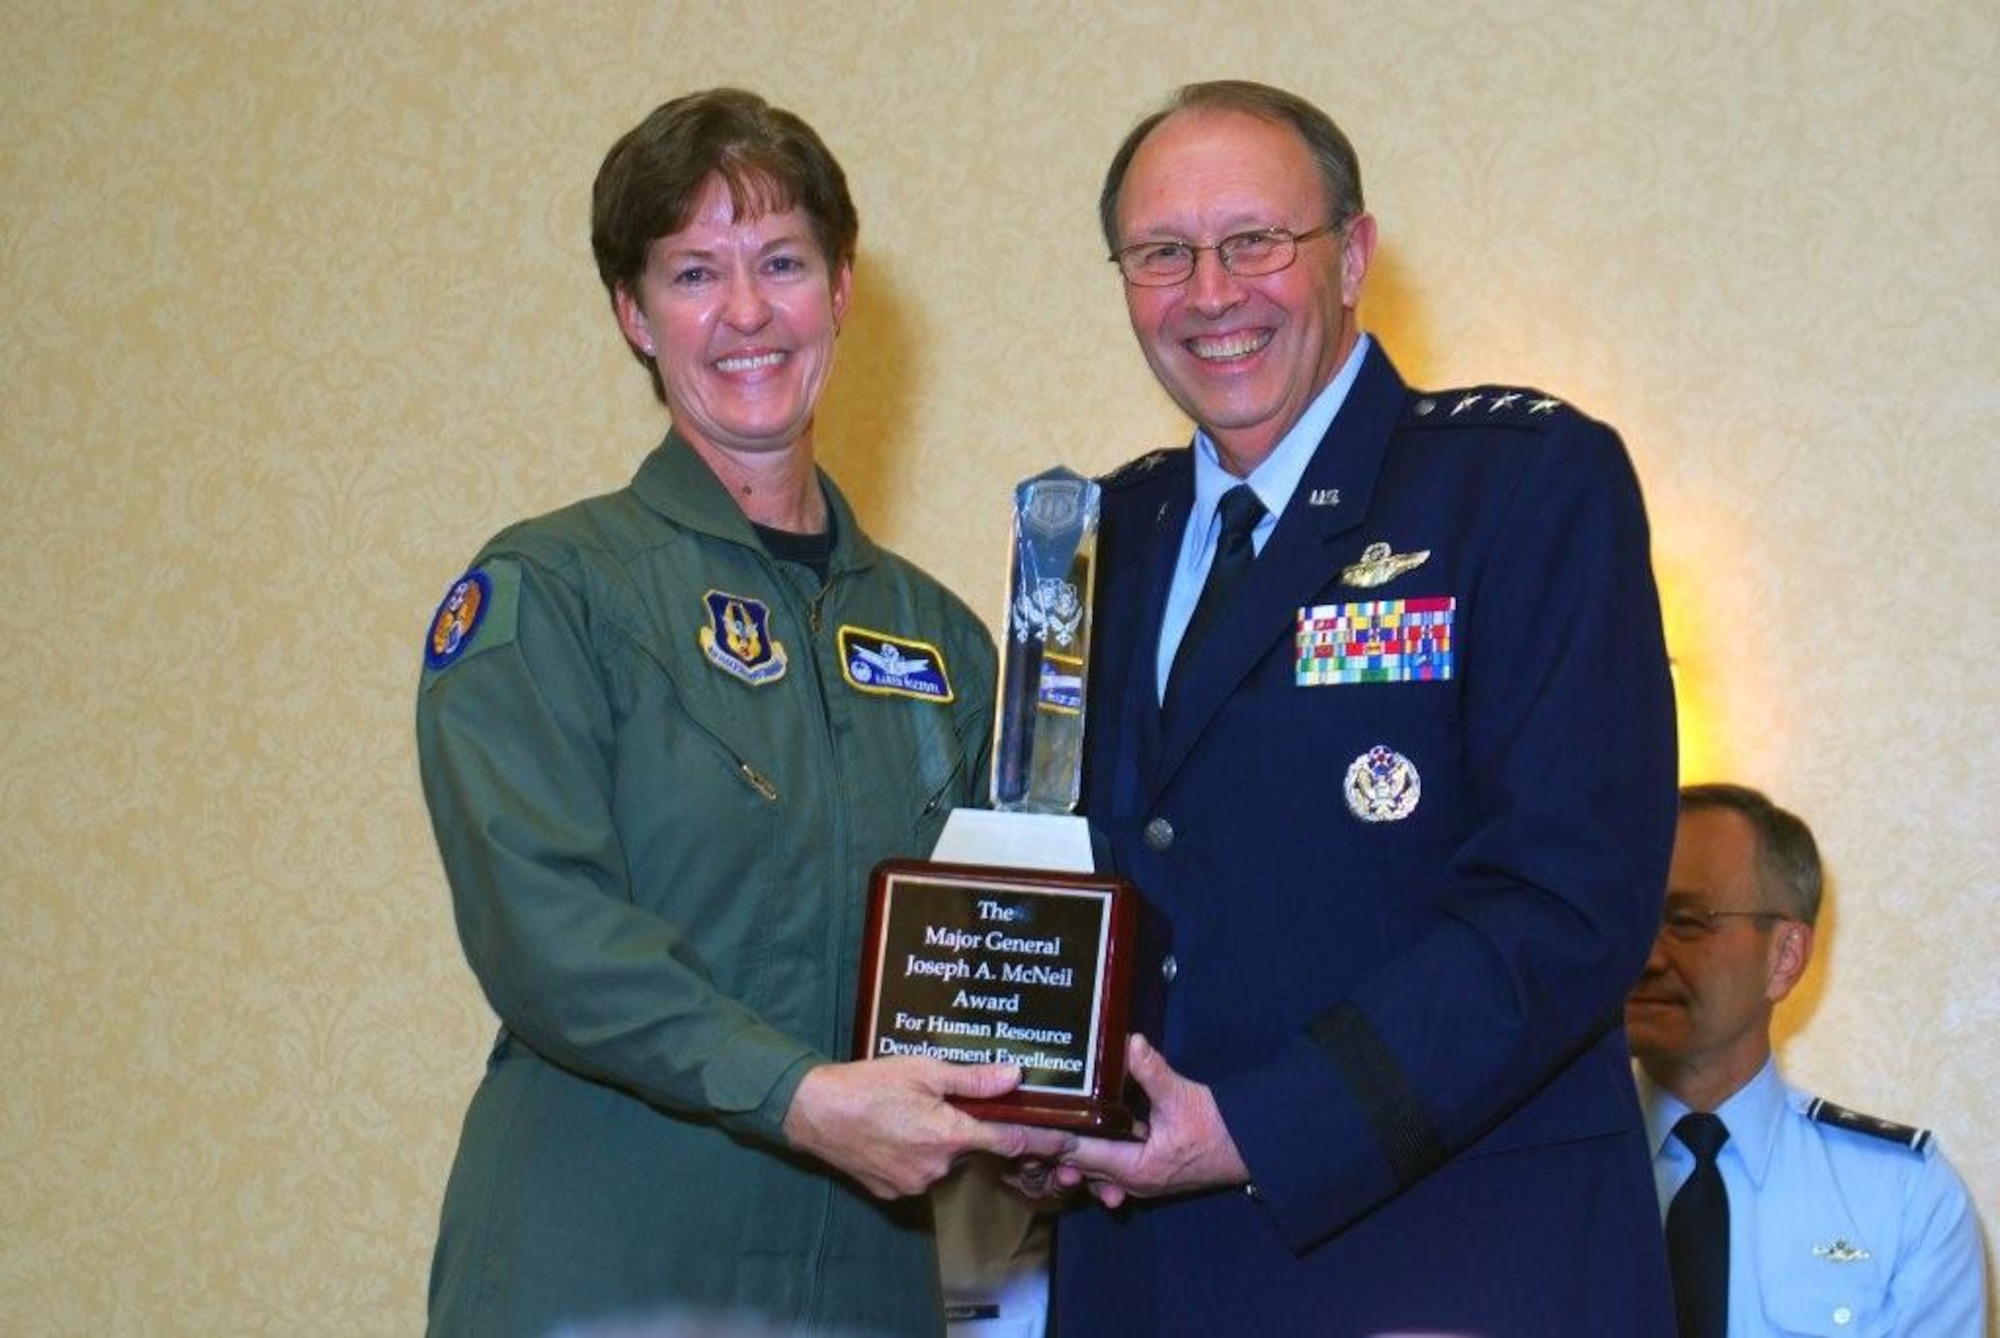 310th Space Wing Commander, Col. Karen Rizzuti accepts the Maj. Gen. Joseph A. McNeil Award for  Human Resources Development Council Leadership Excellence from Lt. Gen. Charles E. Stenner Jr. at the HRDC workshop in Atlanta on Oct. 27. (Courtesy photo)